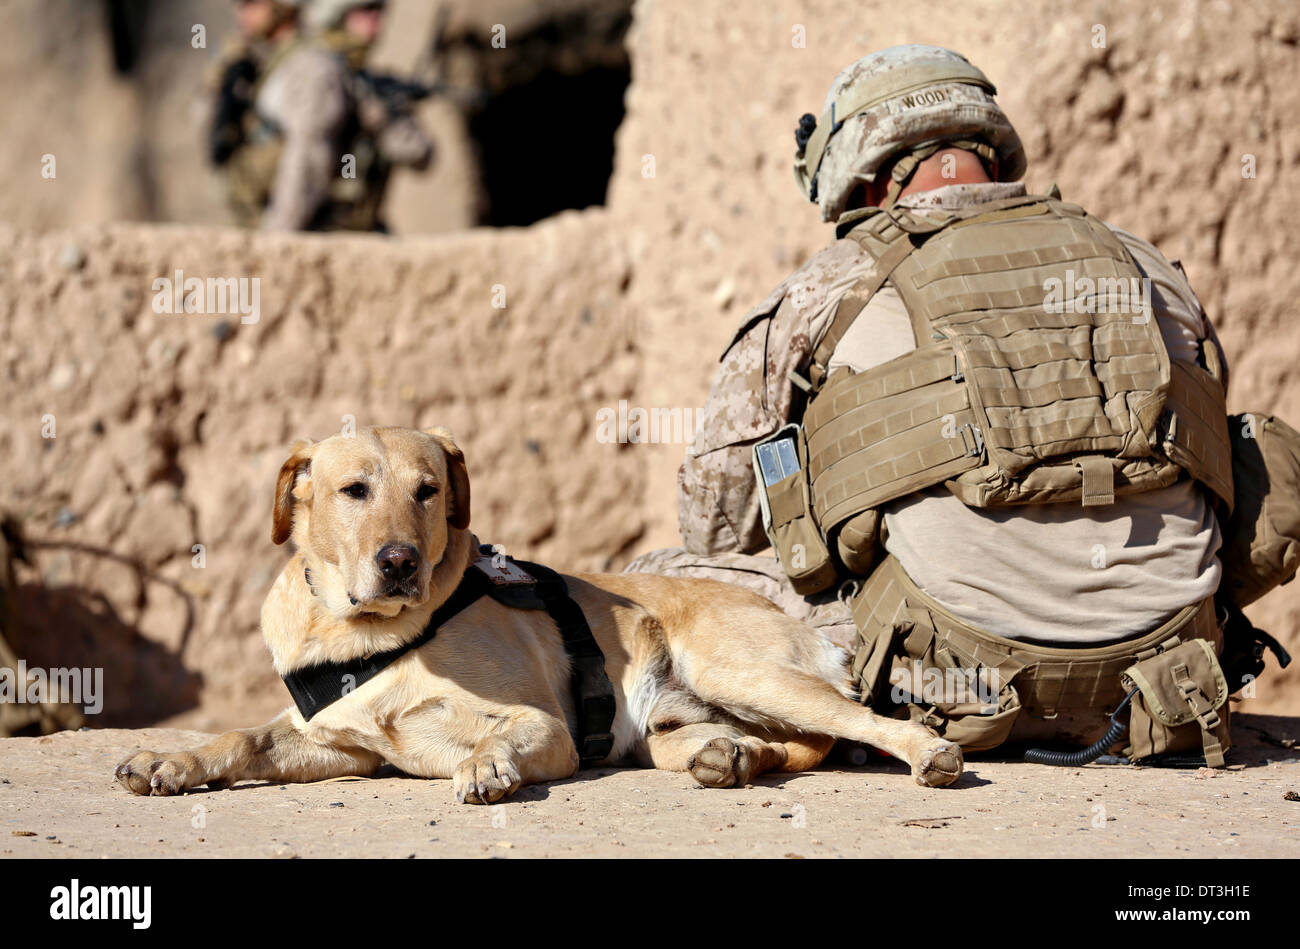 A US Marine and an improvised explosive device detection dog rest during a patrol January 15, 2014 near Patrol Base Boldak in Helmand province, Afghanistan. Stock Photo